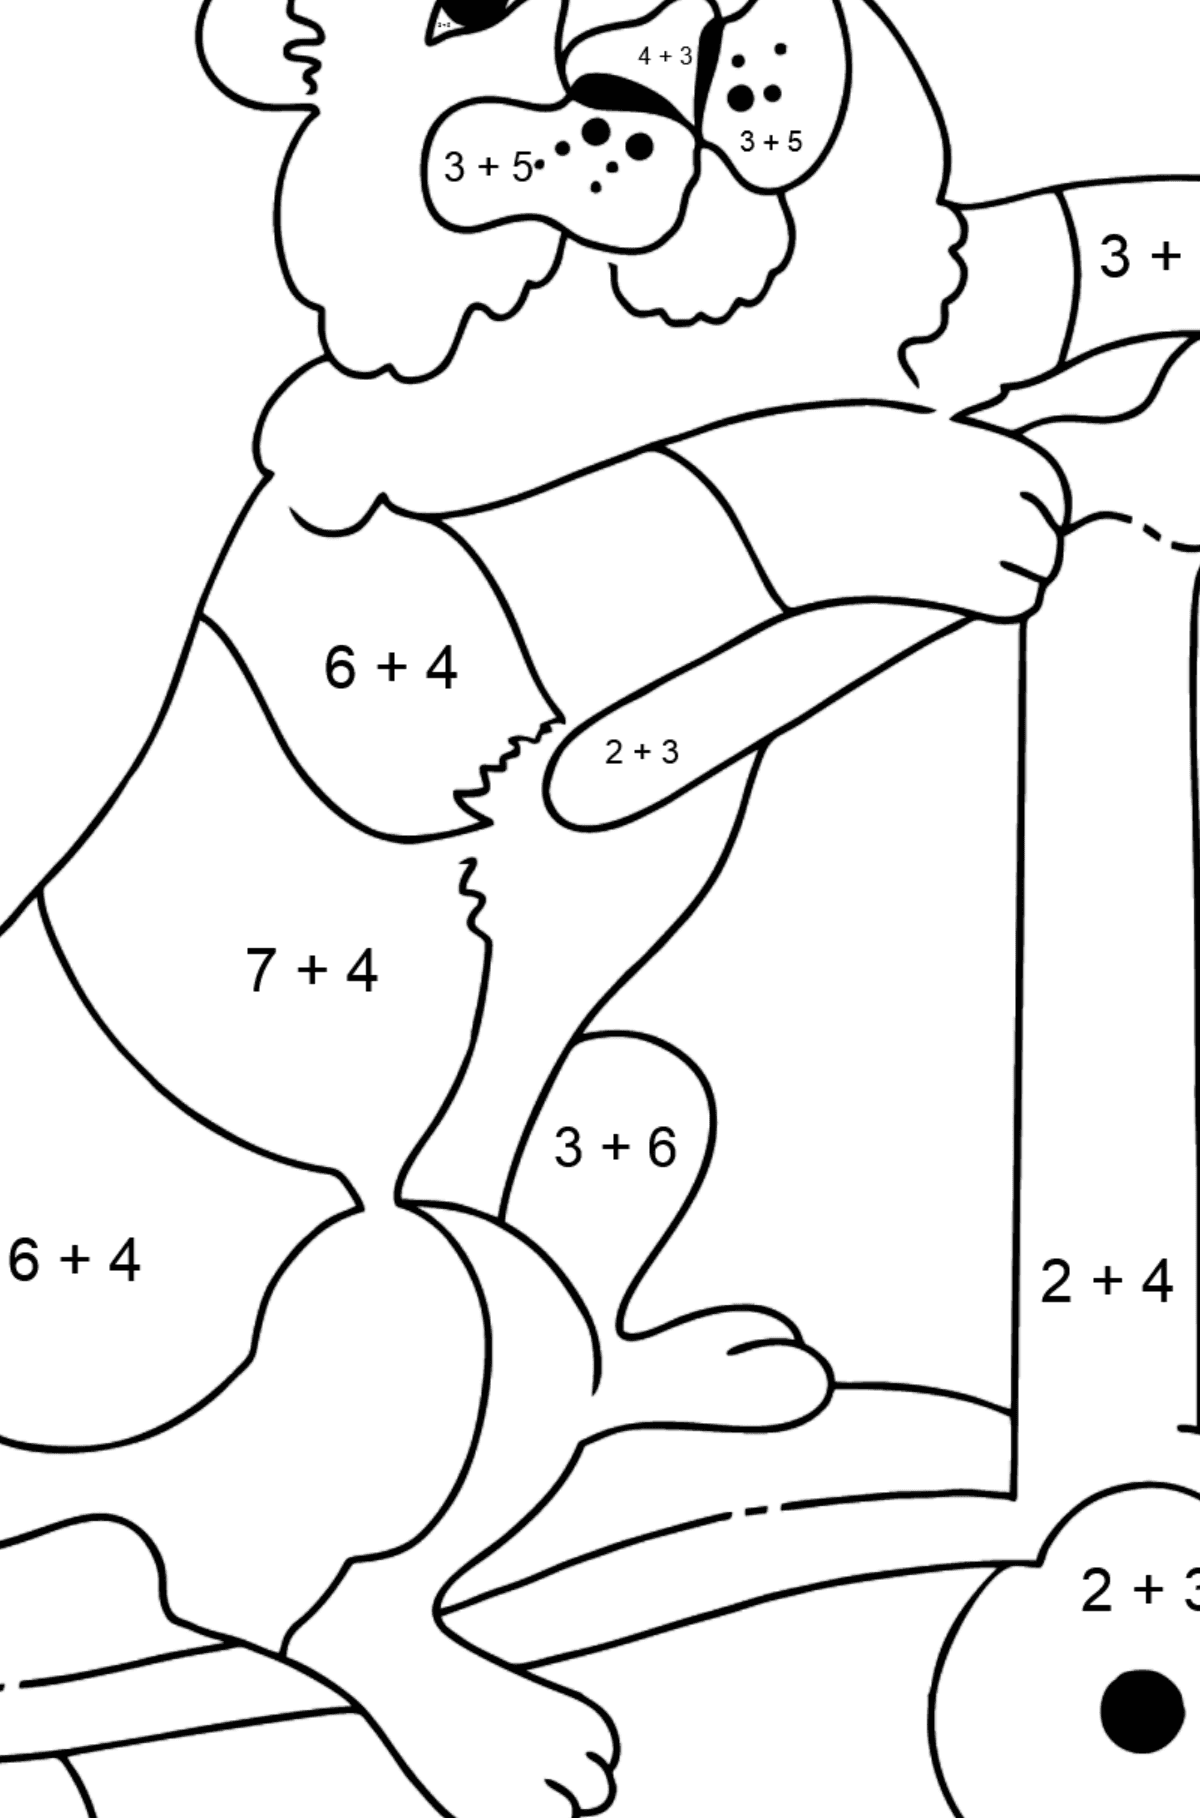 Coloring Page - A Tiger is Learning to Ride a Scooter - Math Coloring - Addition for Kids